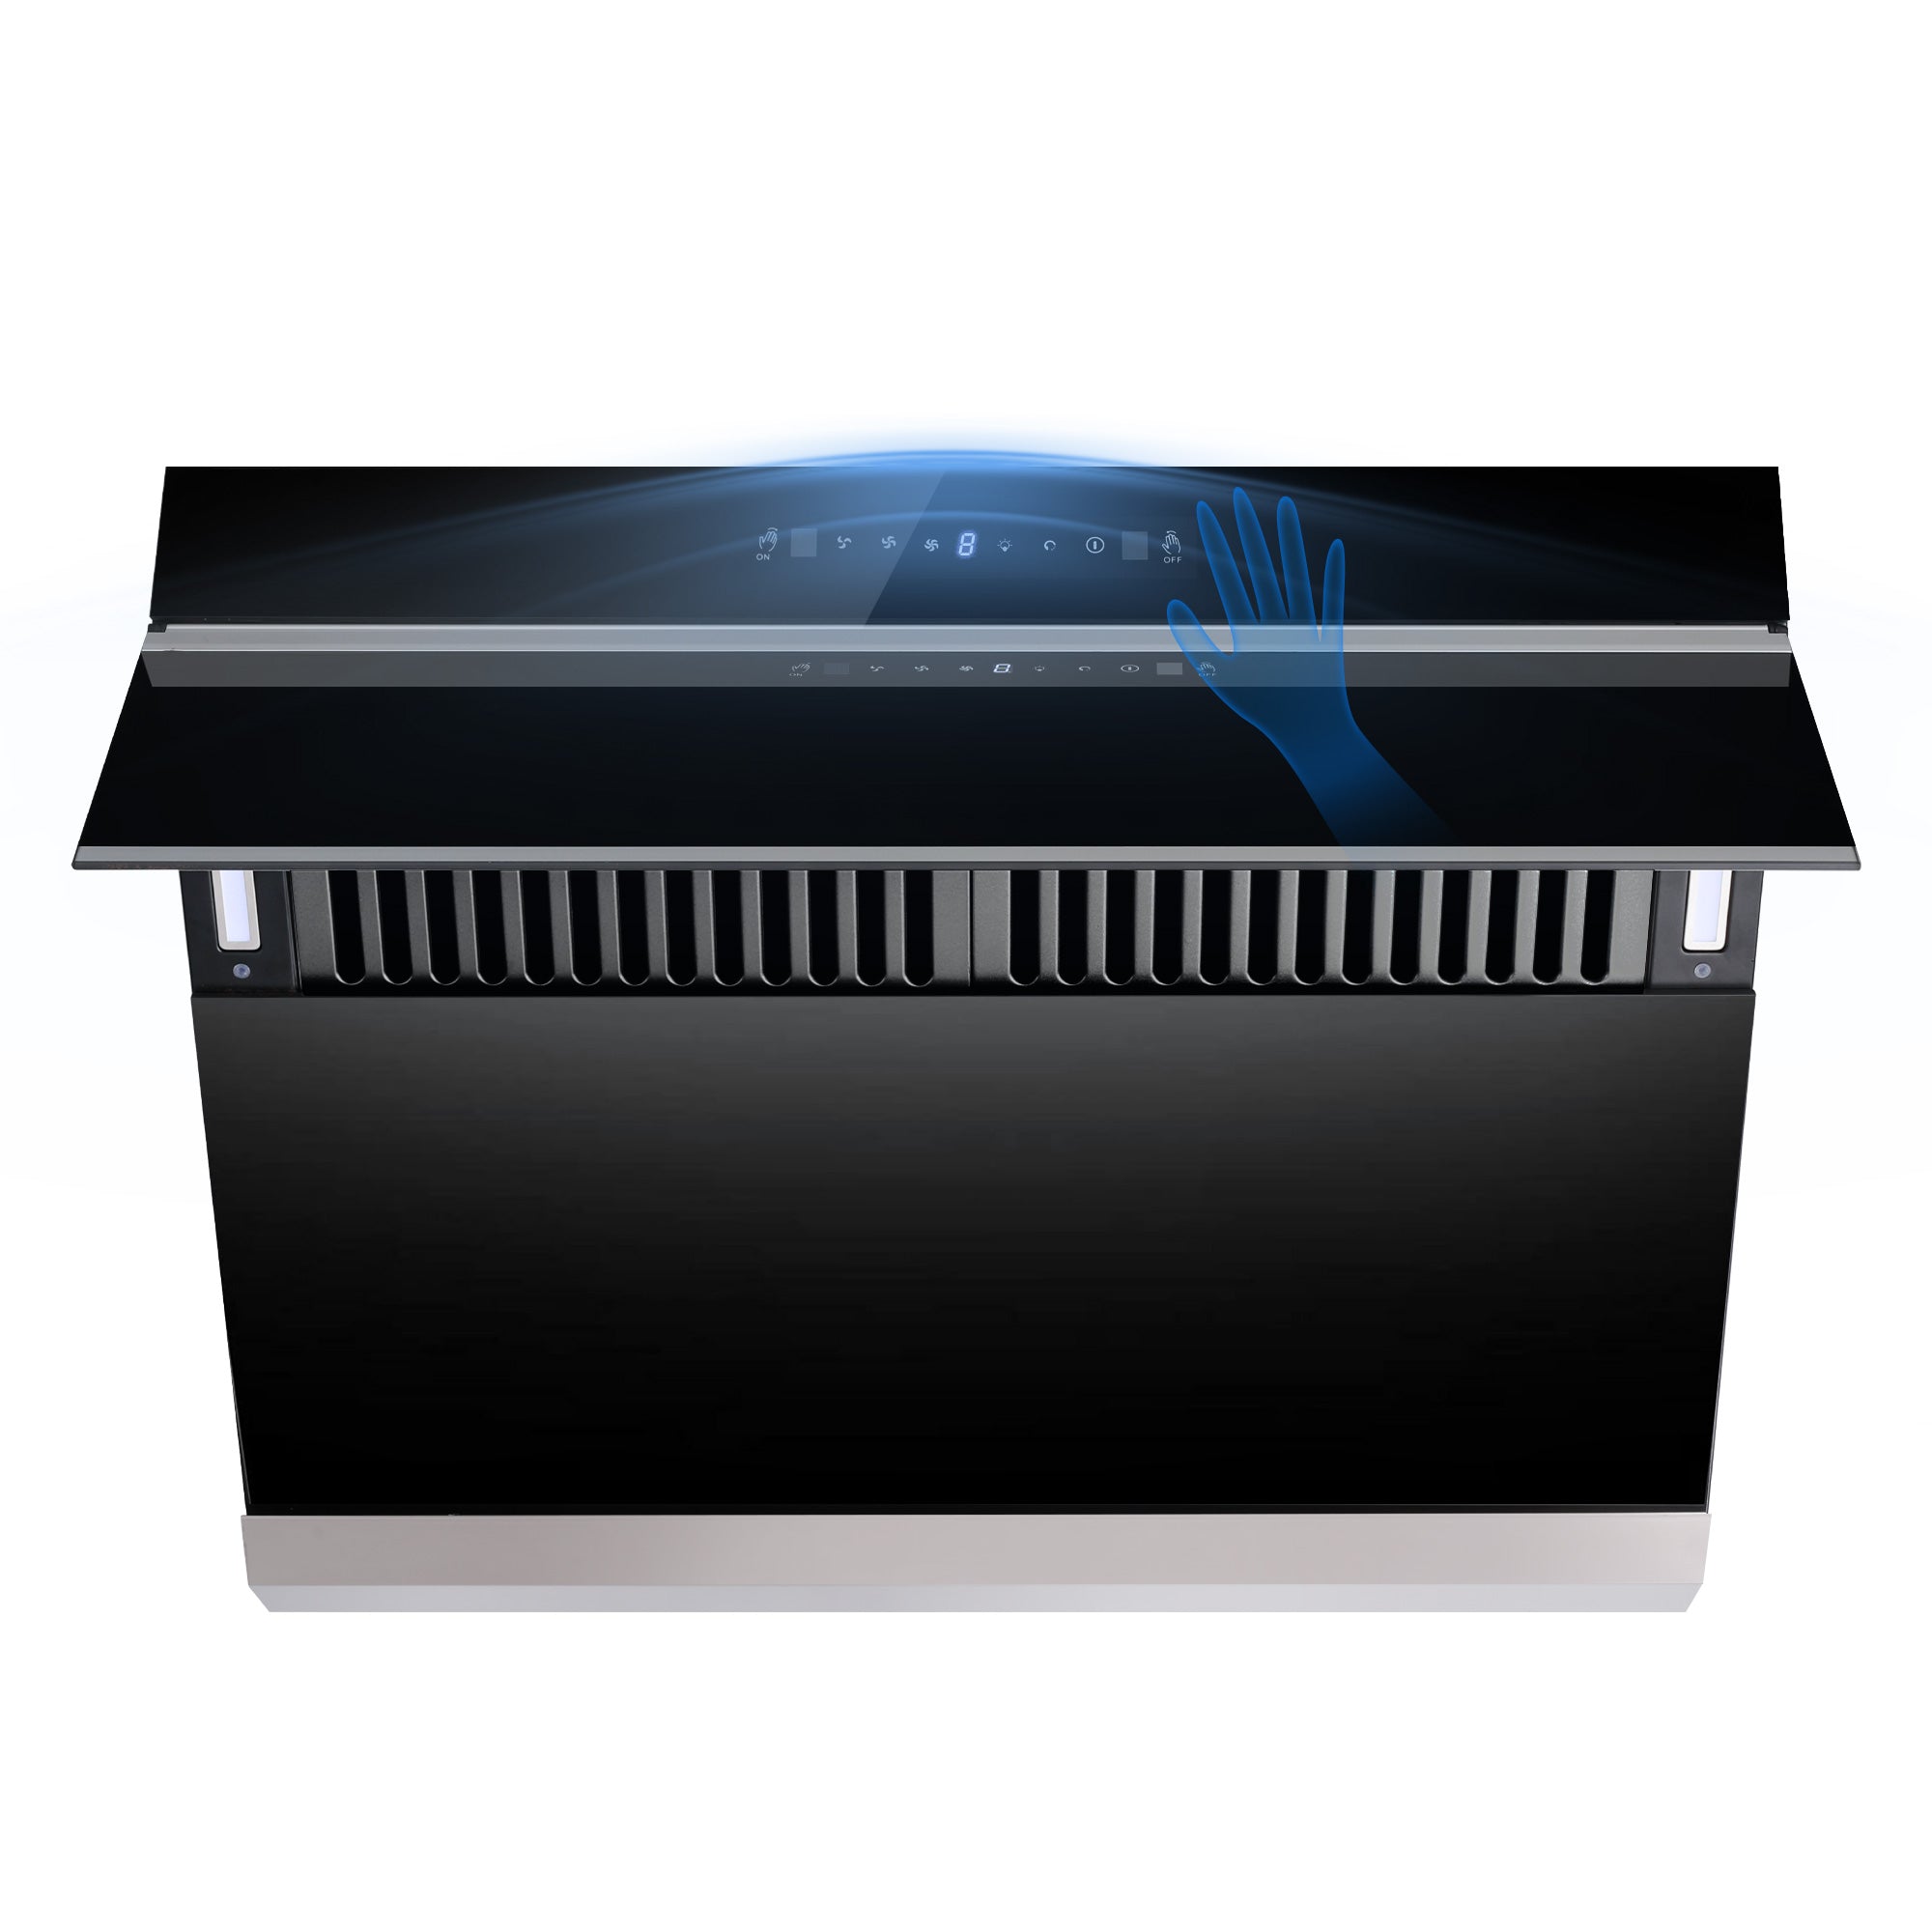 Tieasy 30 inch 900 CFM Wall Mount Or Under Cabinet Range Hood with Heating Auto-cleaning Function - ‎USCX08T75